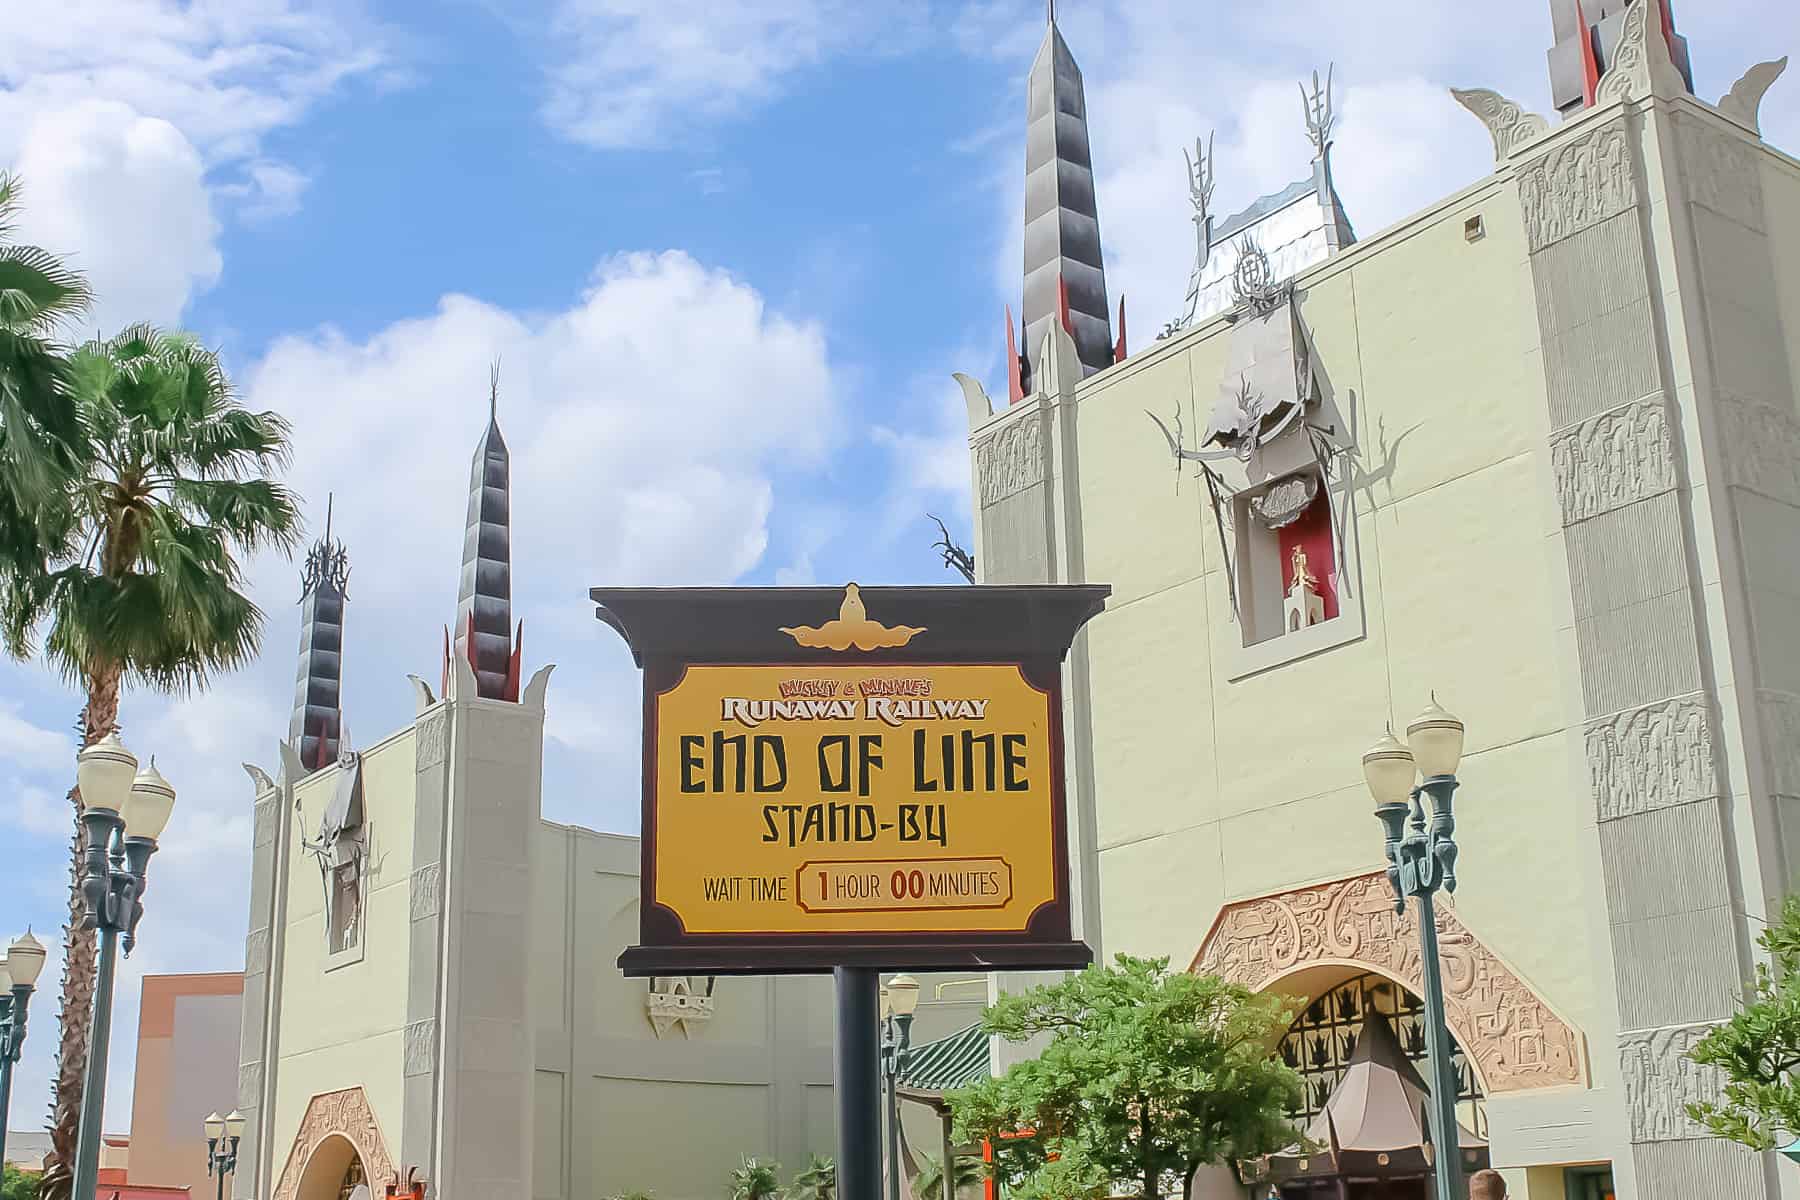 A cast member is holding up an end of the line sign for the stand-by queue. 